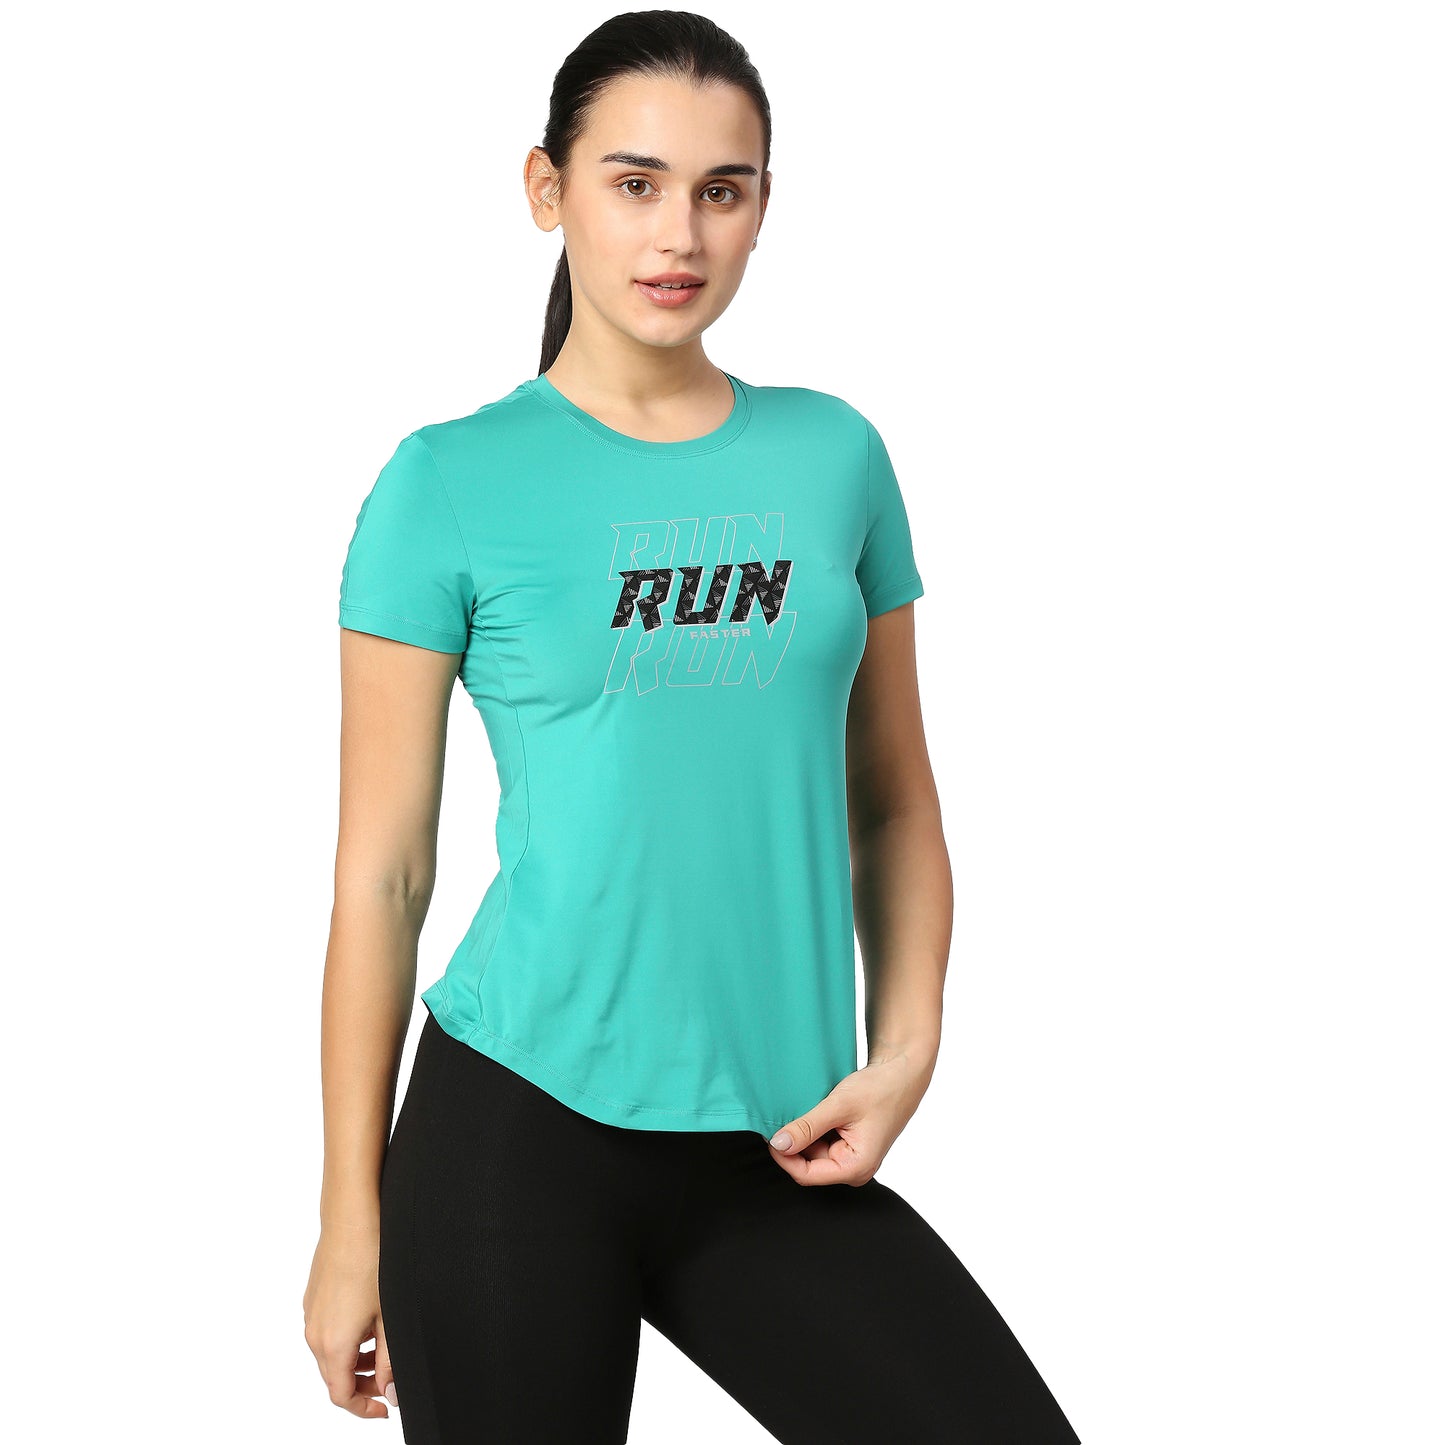  Haimont Women's Athletic Performance T-Shirts